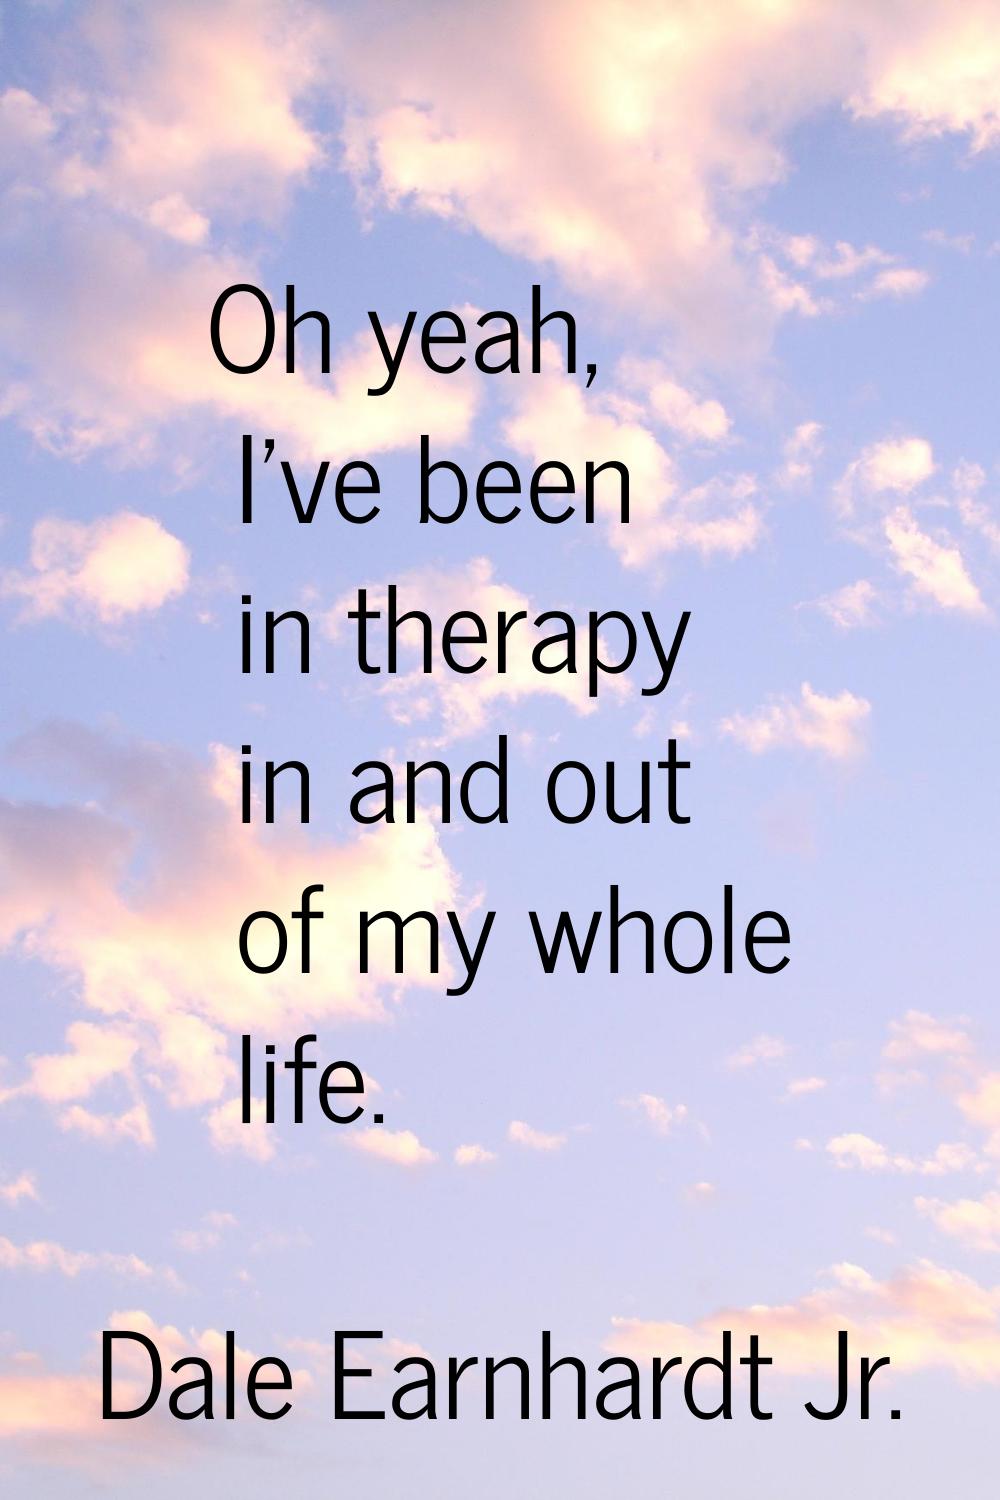 Oh yeah, I've been in therapy in and out of my whole life.